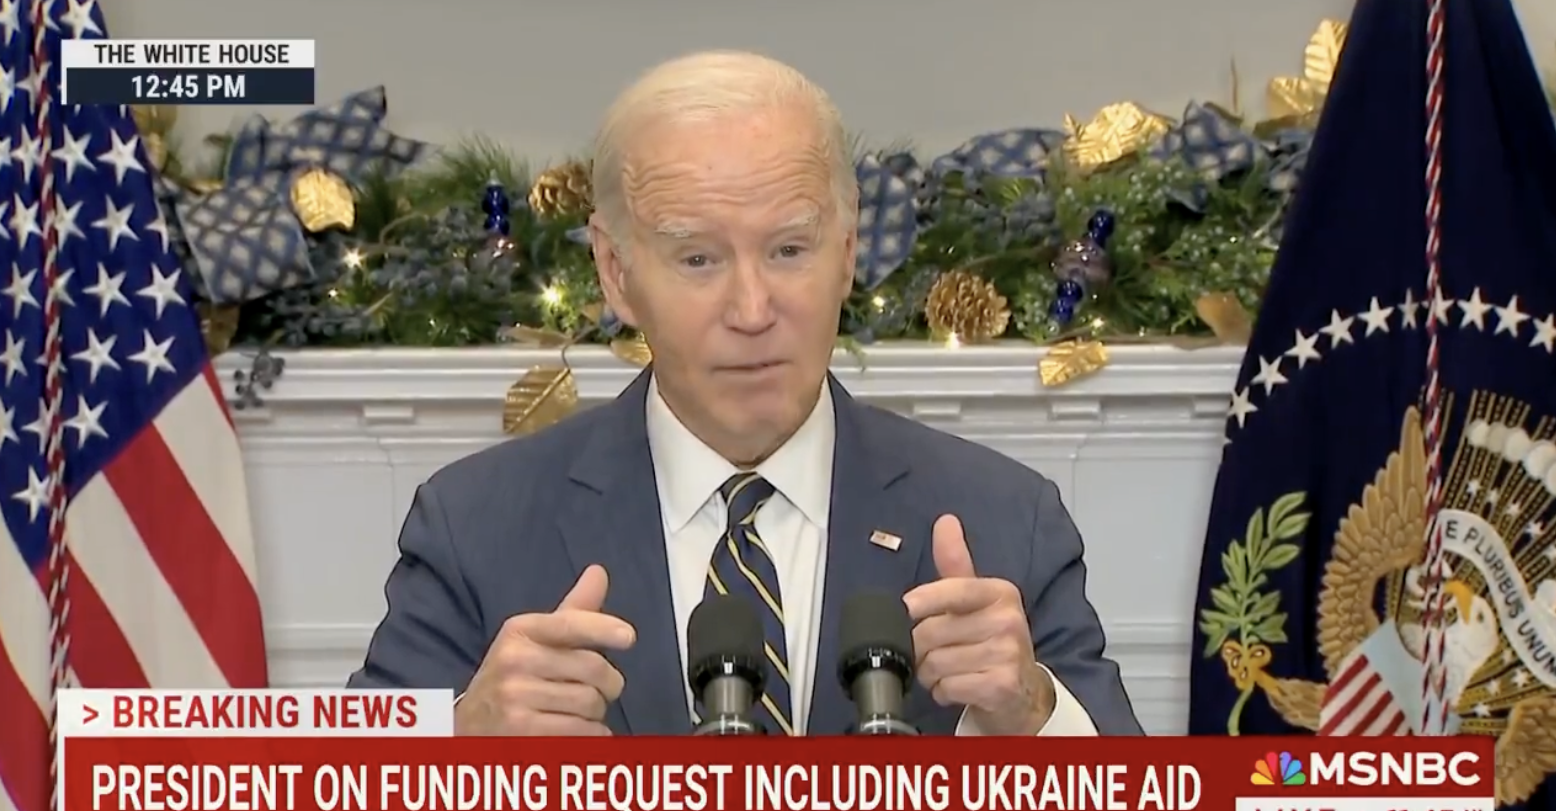 BREAKING: Hunger Games Biden Blackmails America To Keep Ukraine Grift Going - Give Us Money Or We Will Send Your Children To The Meat Grinder - CDM - Human Reporters • Not Machines